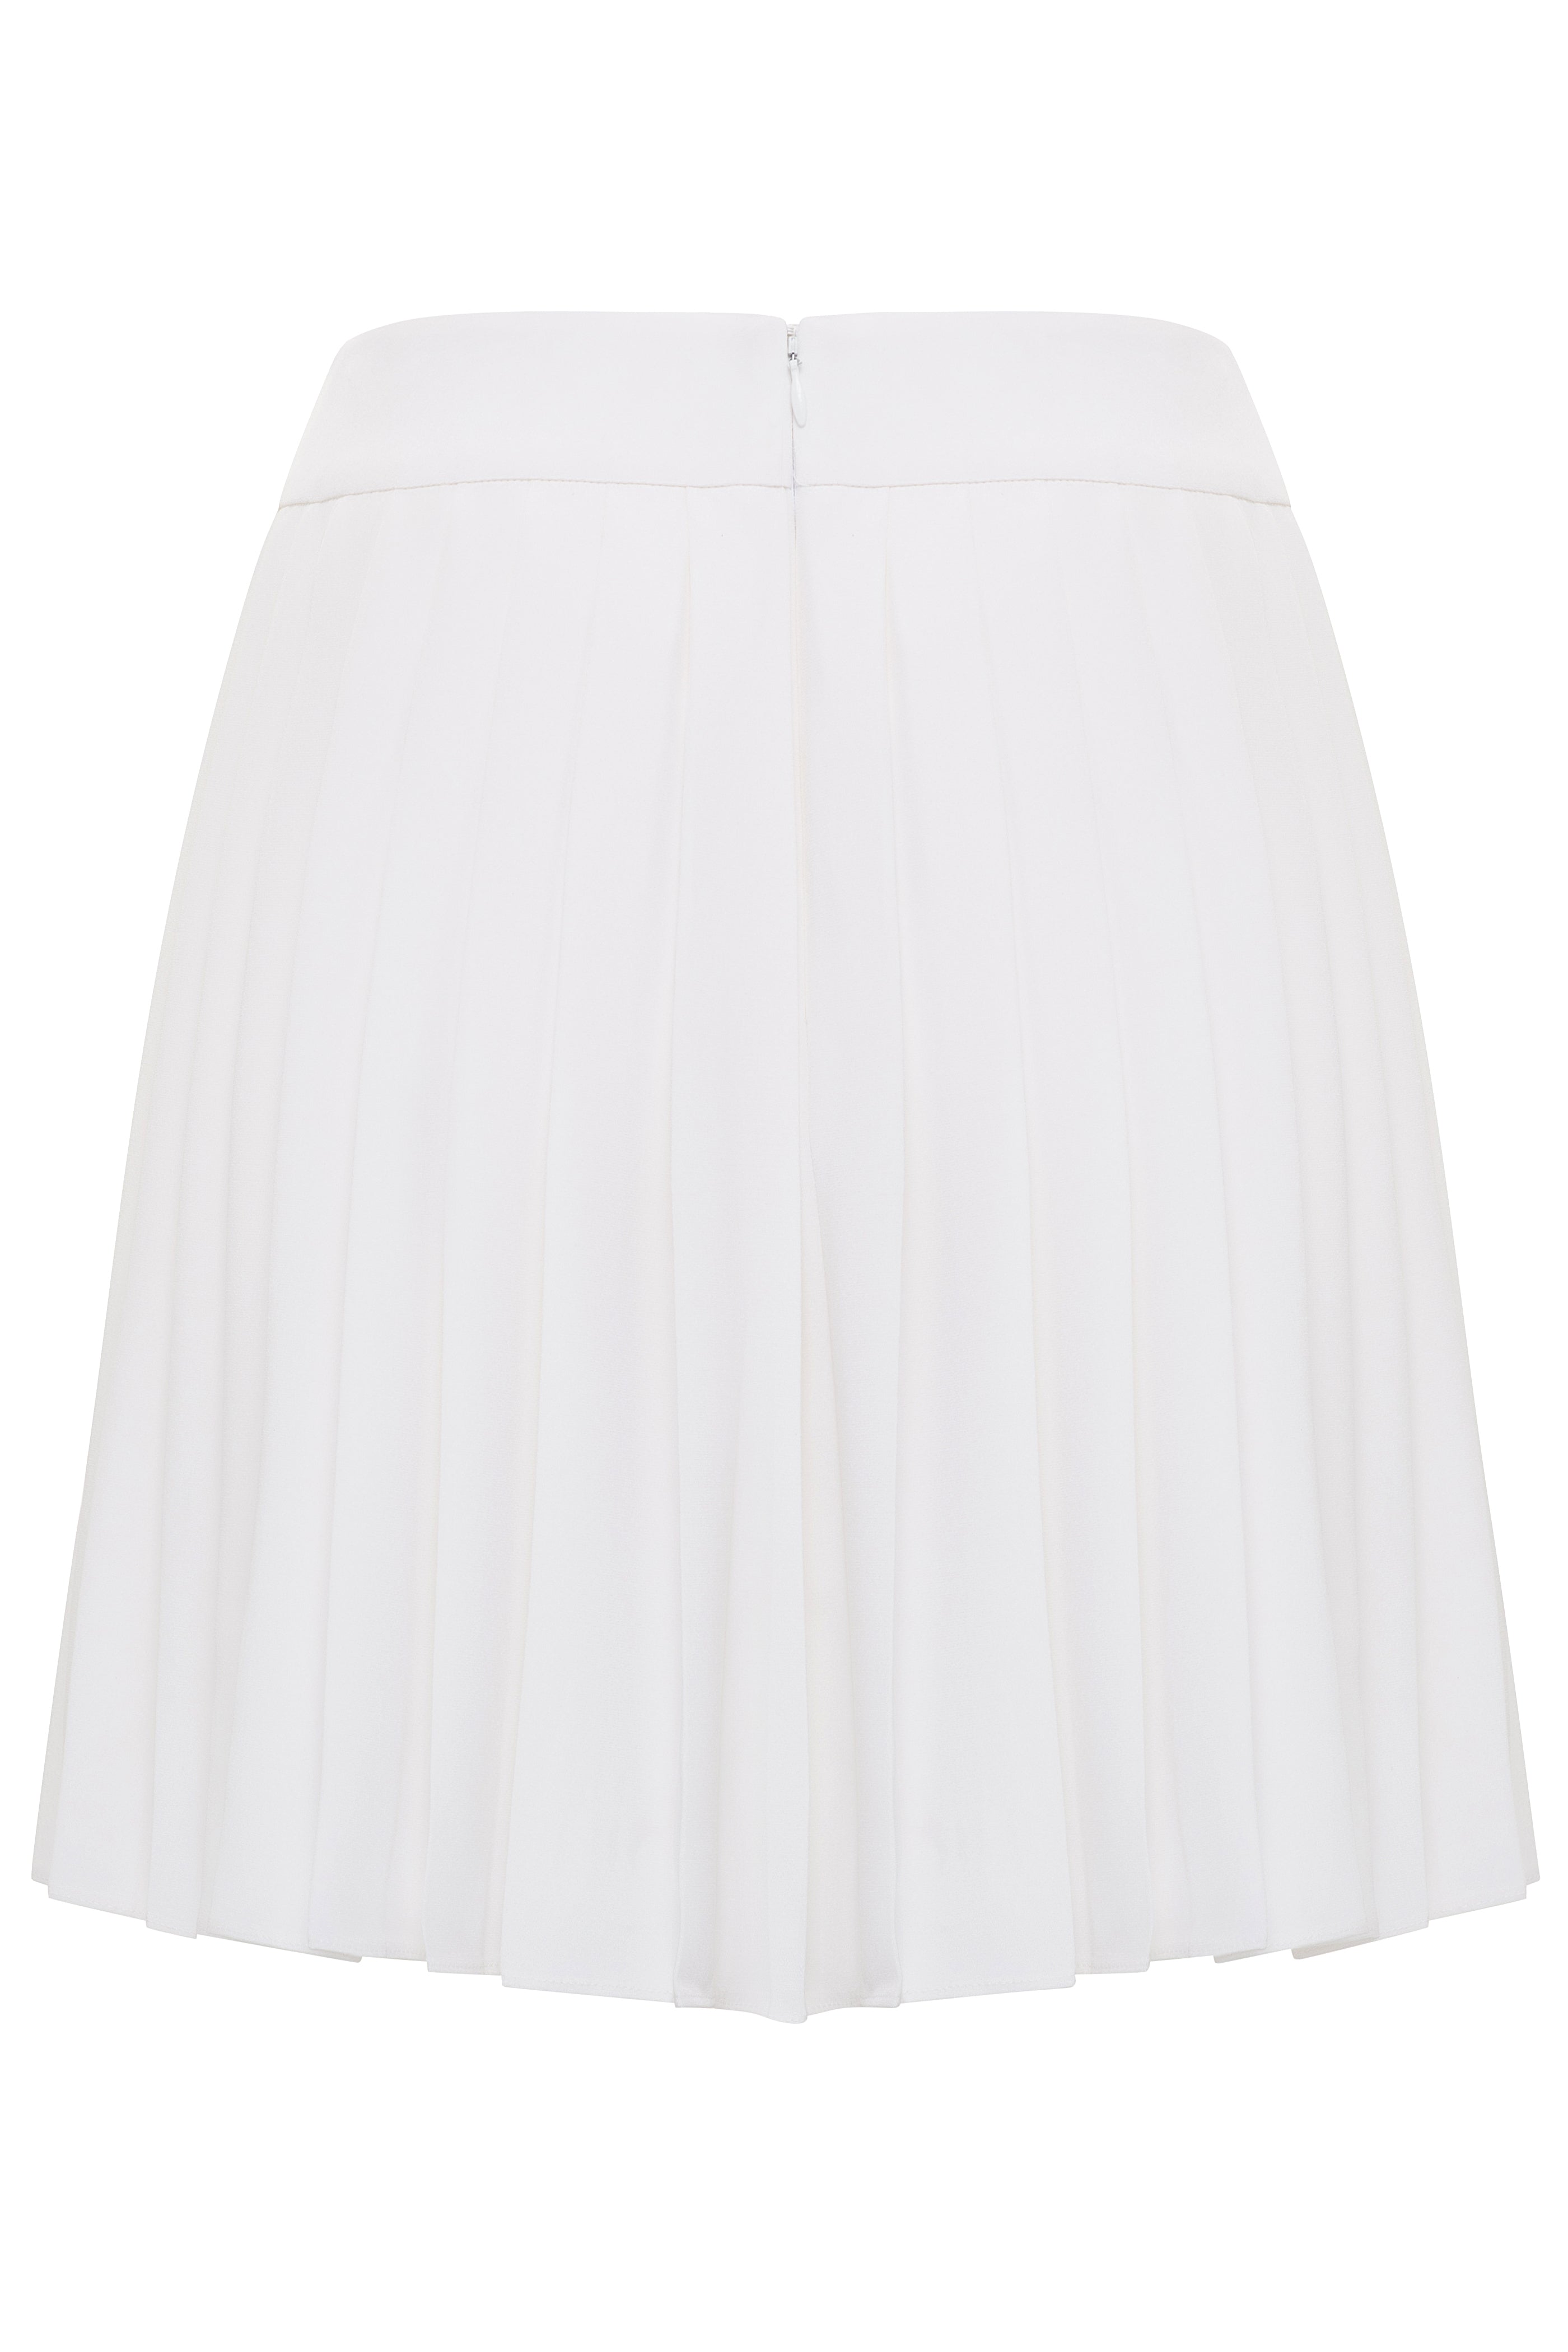 Shop Alexis Silk Pleated Mini Skirt - Classic Chic – Fifth & Welshire®